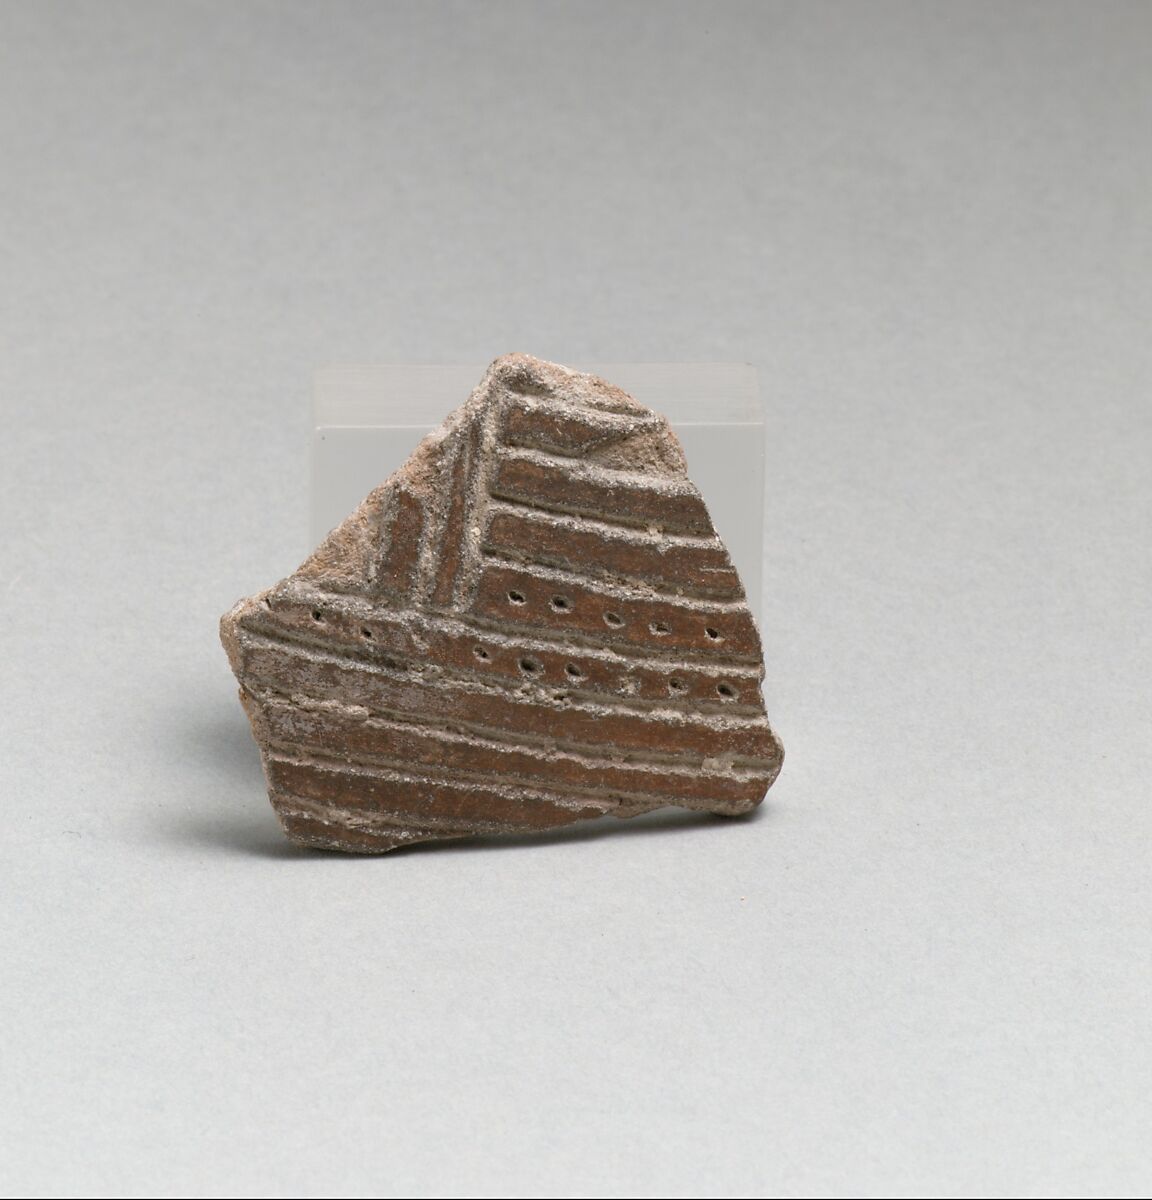 Terracotta vessel fragment with incised lines and punctations, Terracotta, Cretan 